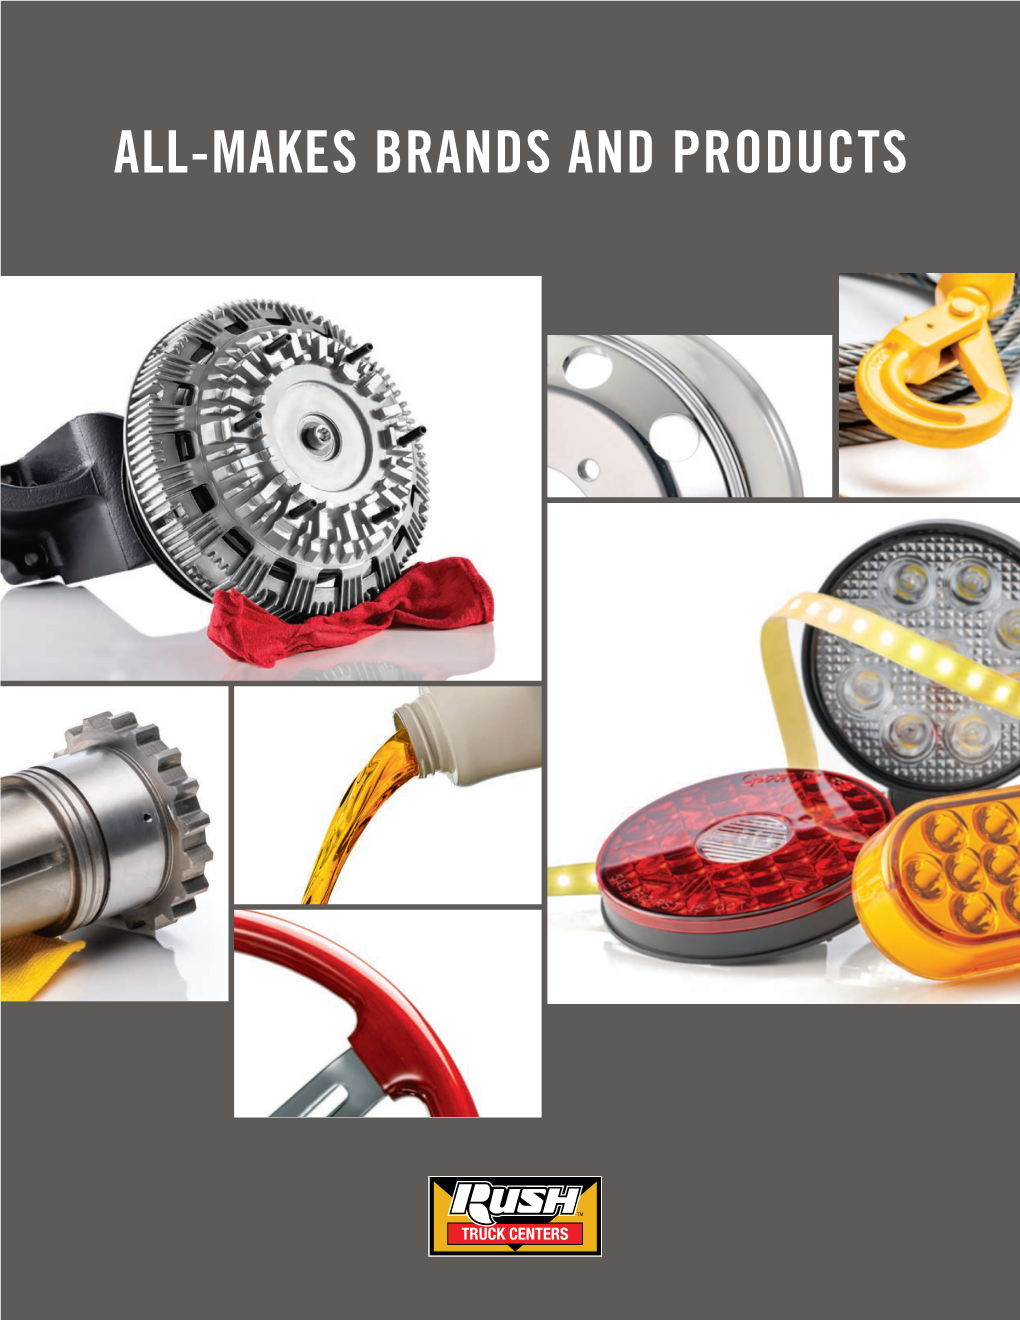 All-Makes Brands and Products the Parts You Need, the Brands You Trust